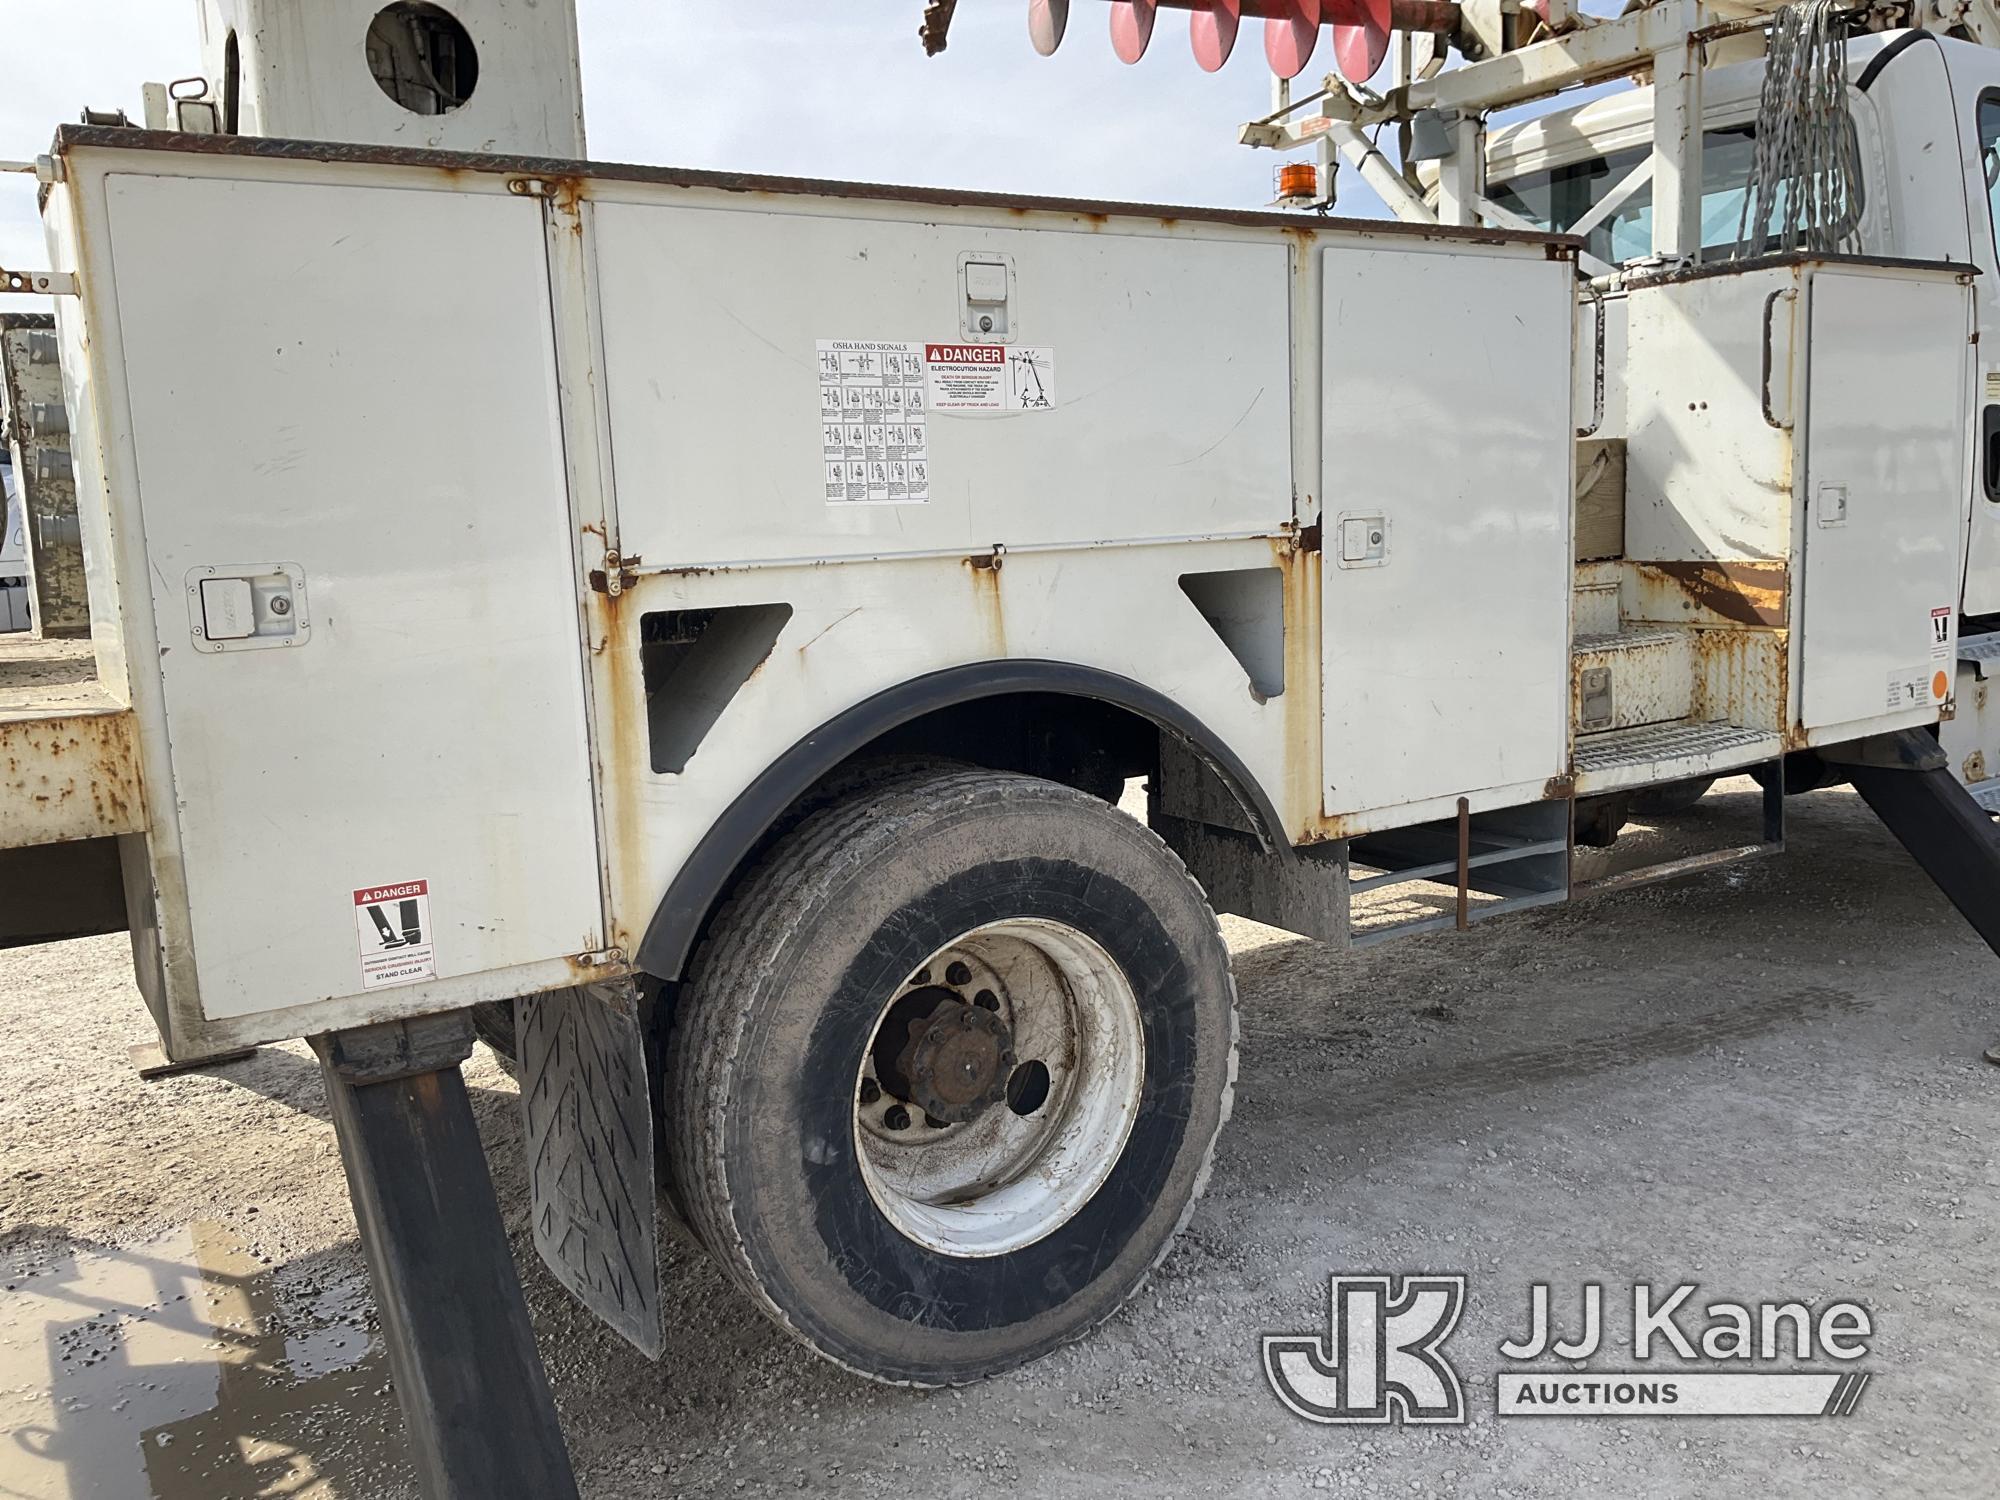 (Bloomington, IL) Terex Commander C4047, Digger Derrick rear mounted on 2017 Freightliner M2 106 4x4